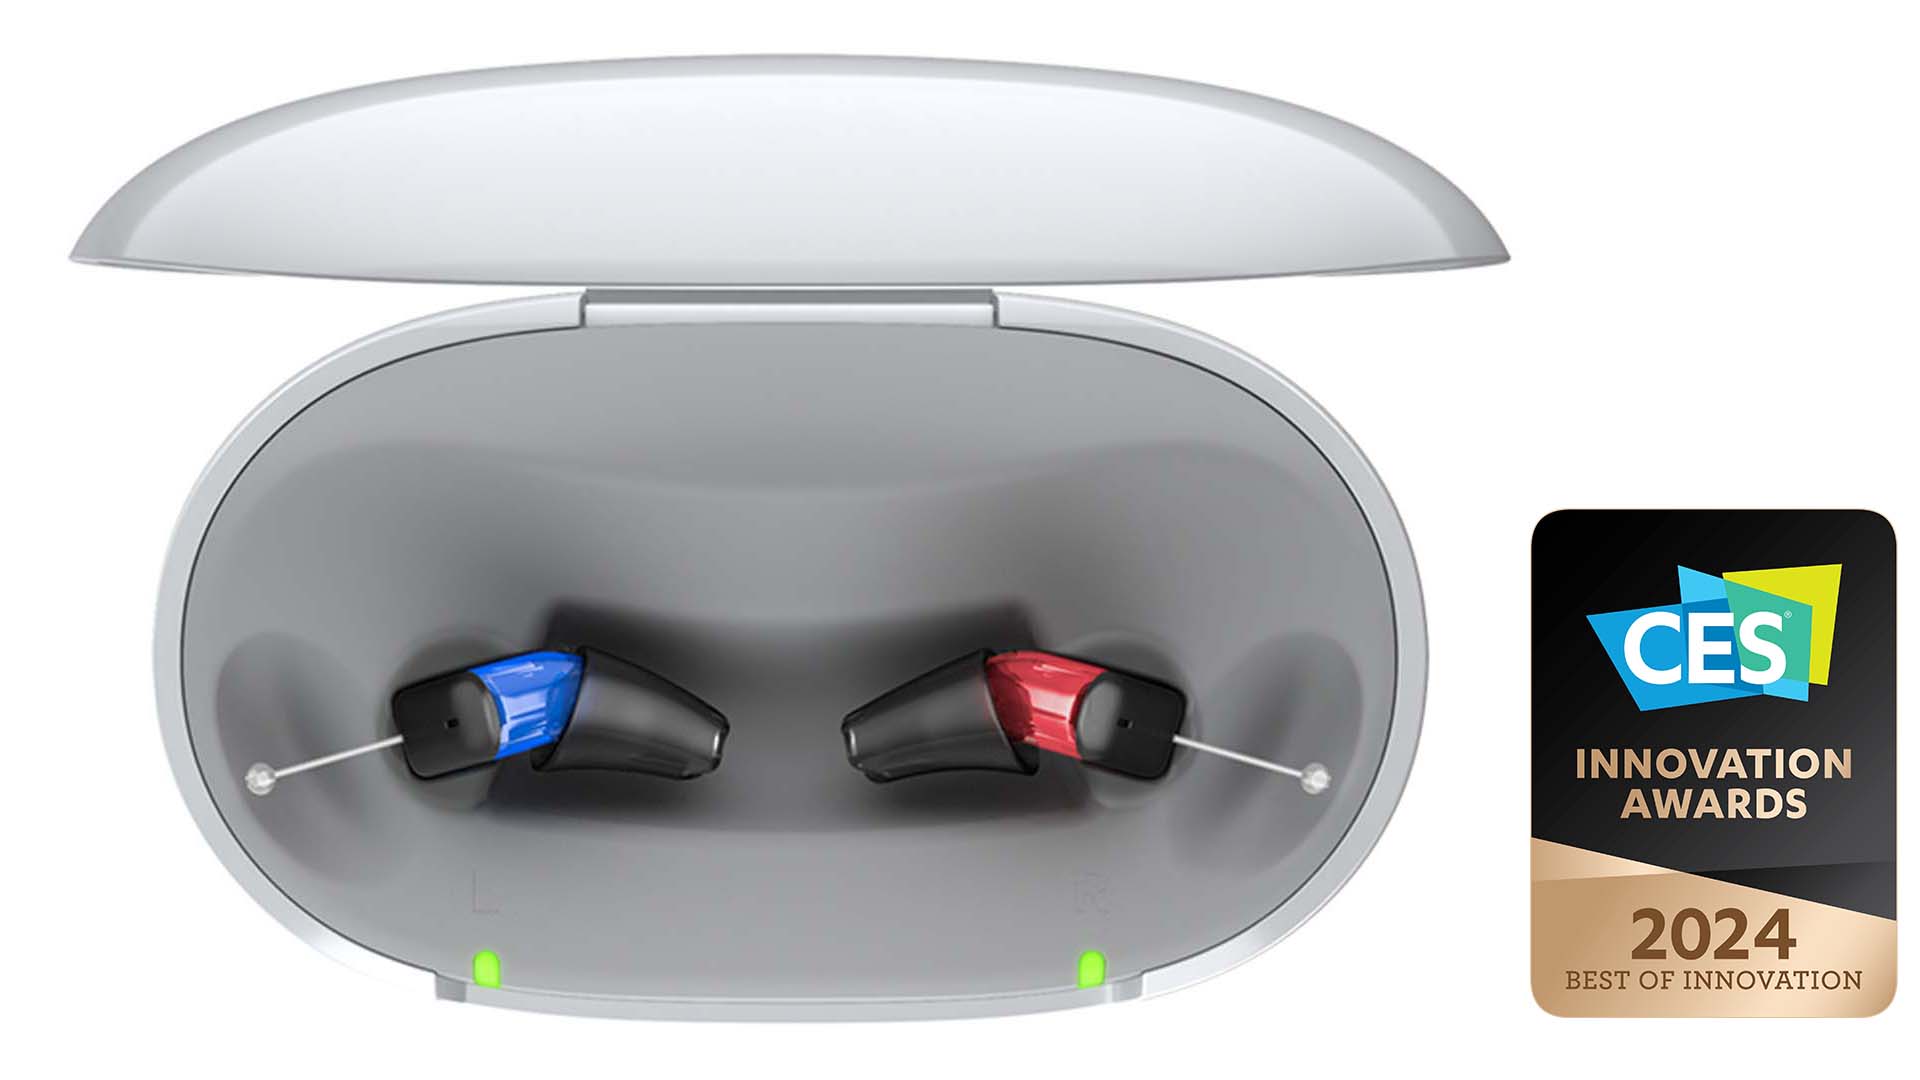 Silk Charge&Go instant-fit hearing aids in charger with CES award